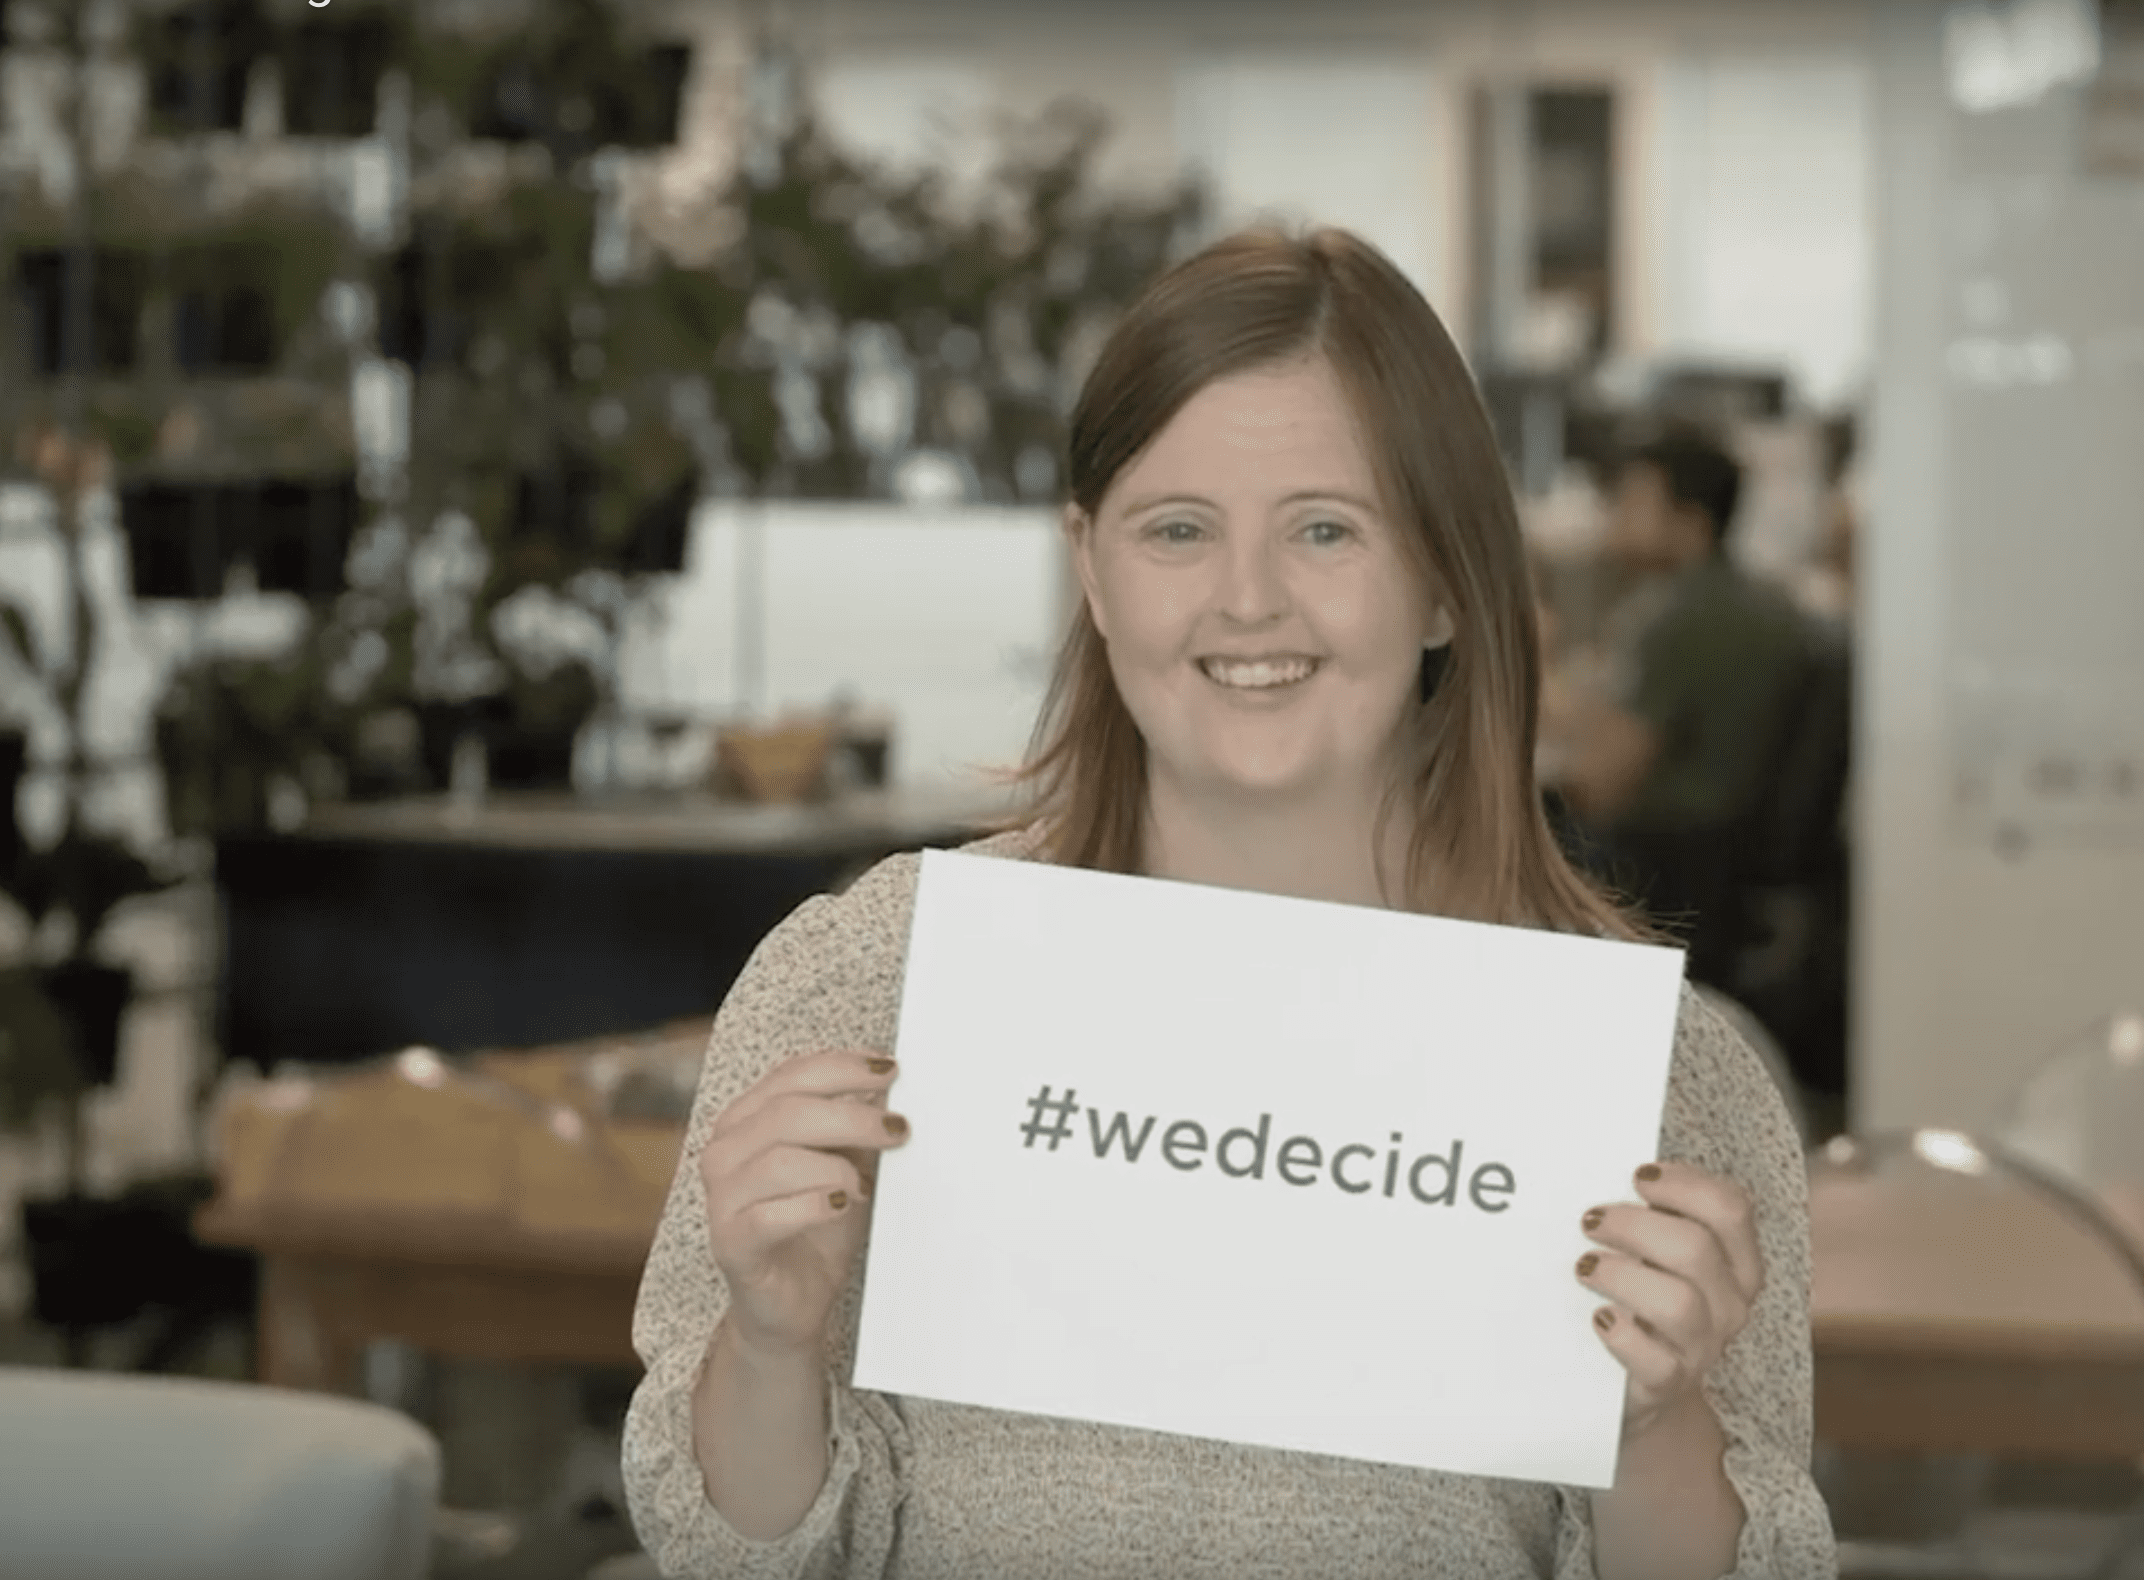  “We Decide” message from Down syndrome community